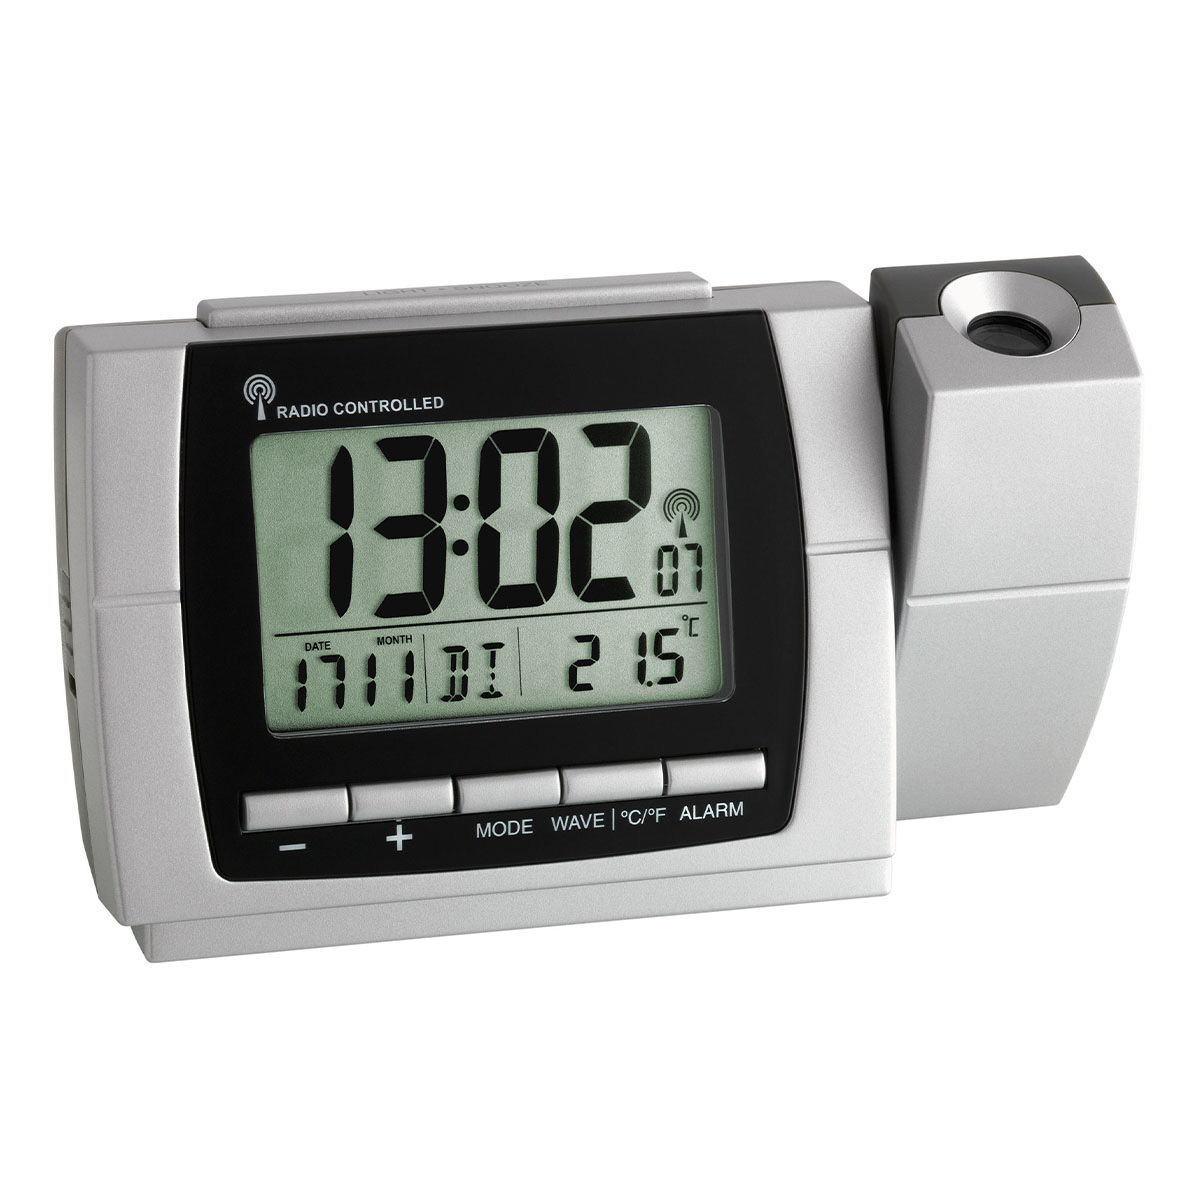 Radio-Controlled Projection Alarm Clock with Temperature